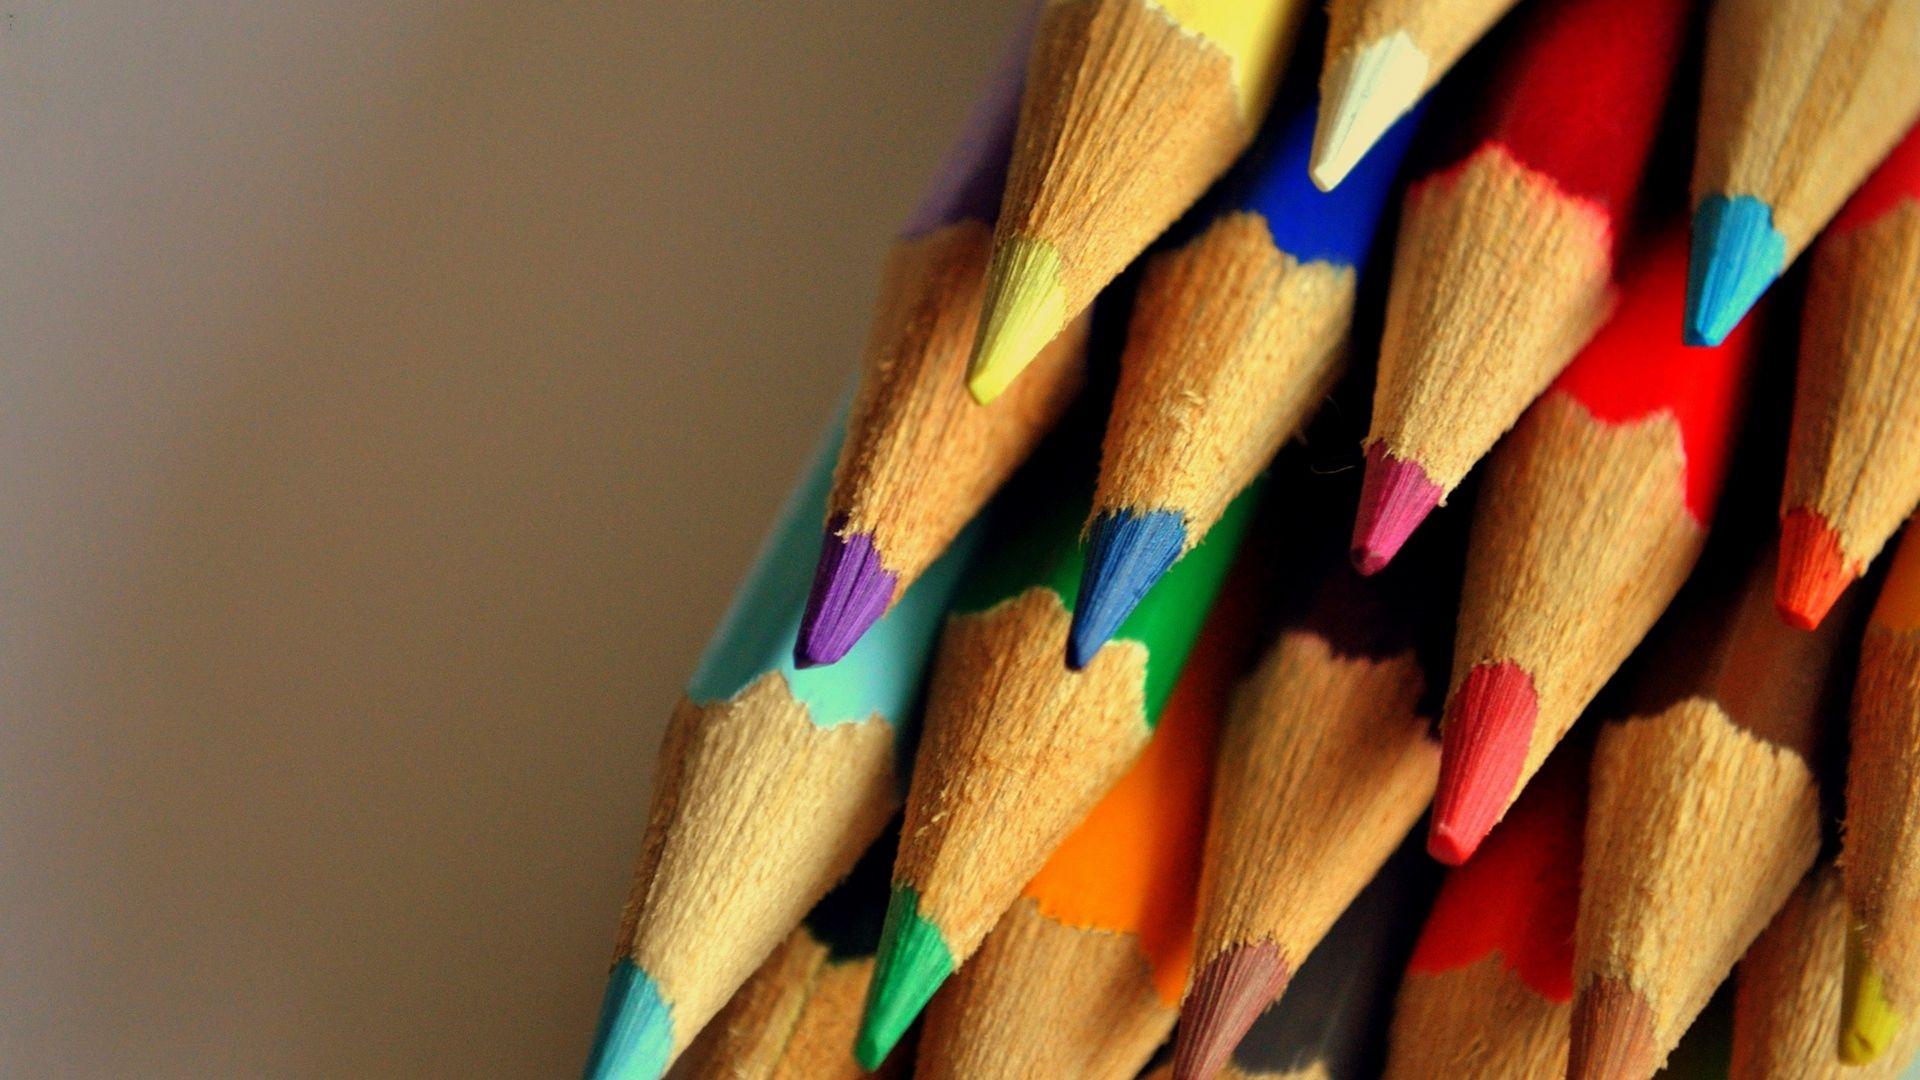 Download wallpaper 1920x1080 crayons, multicolored, set, point full